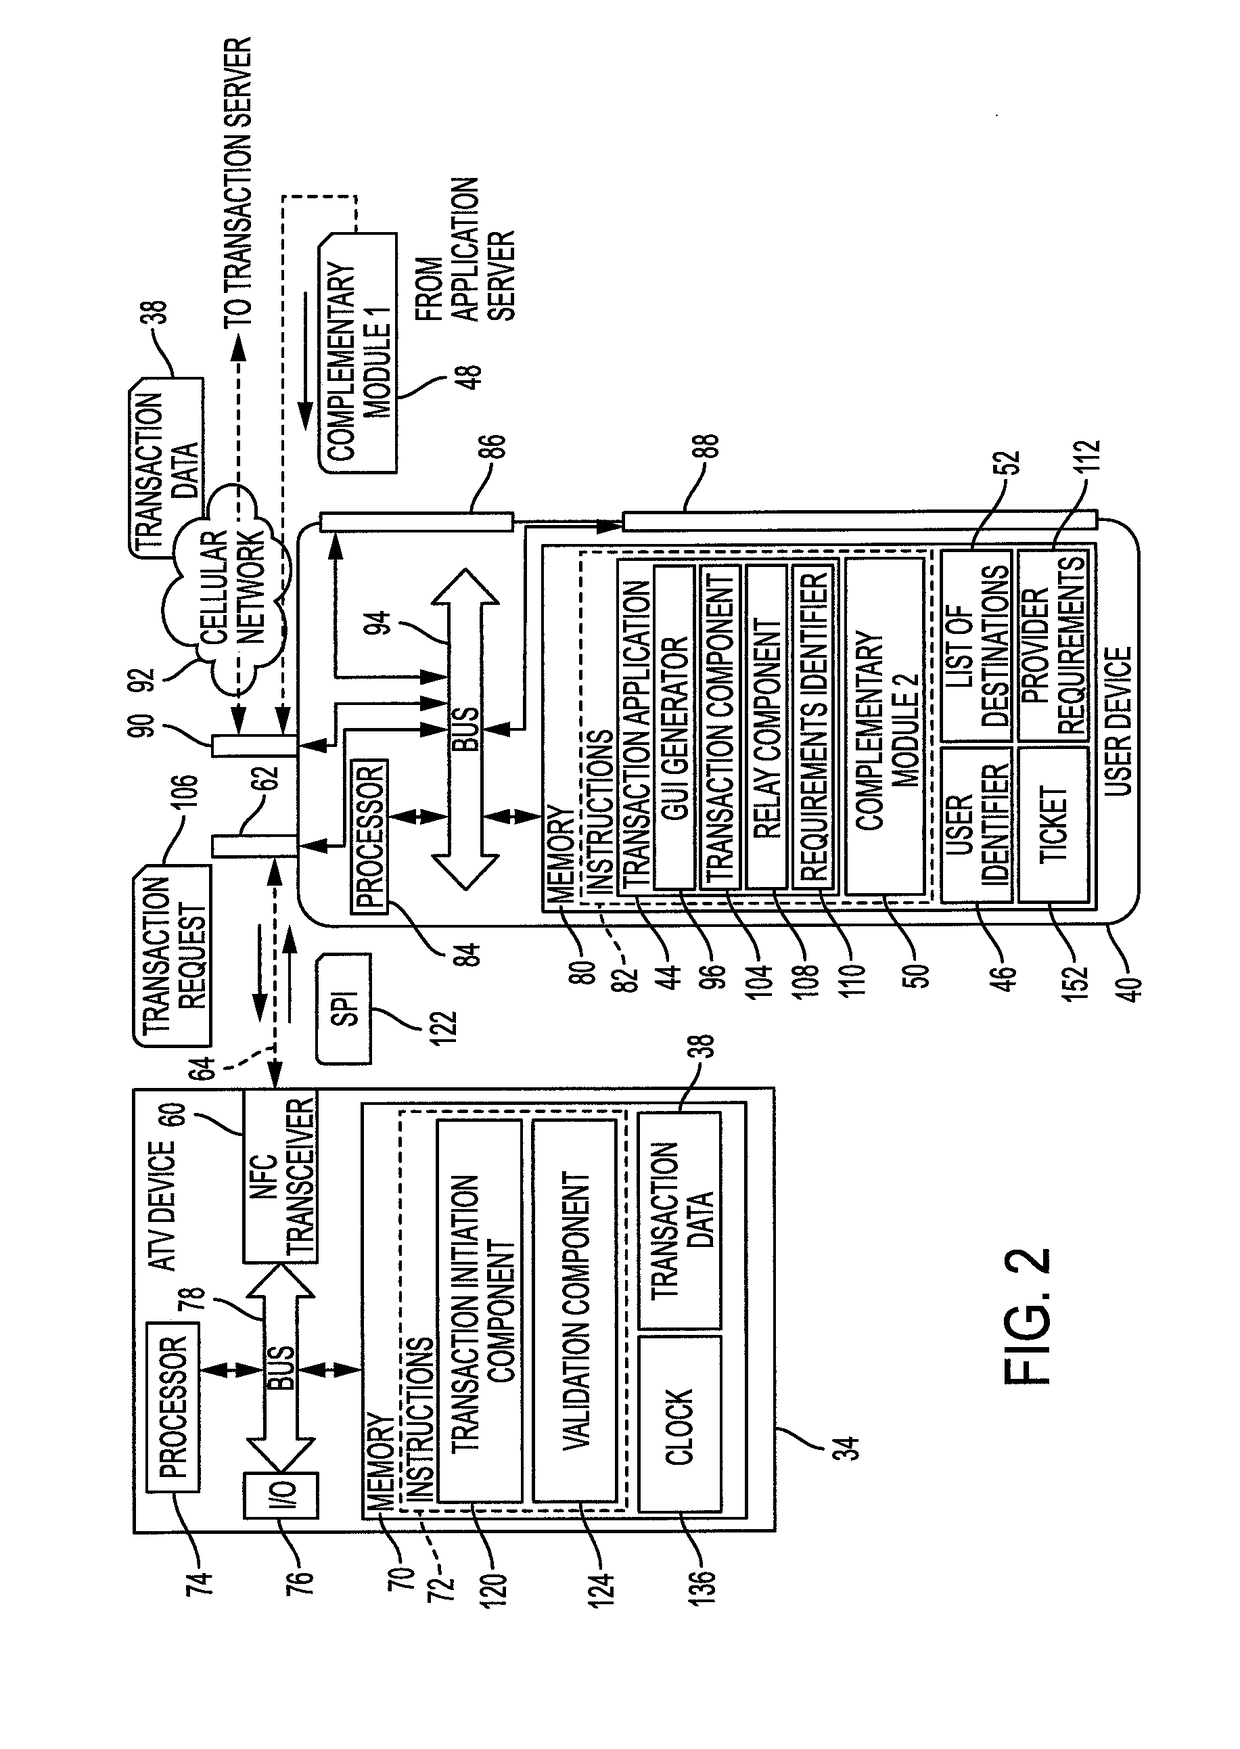 System and method for specializing transactions according to the service provider